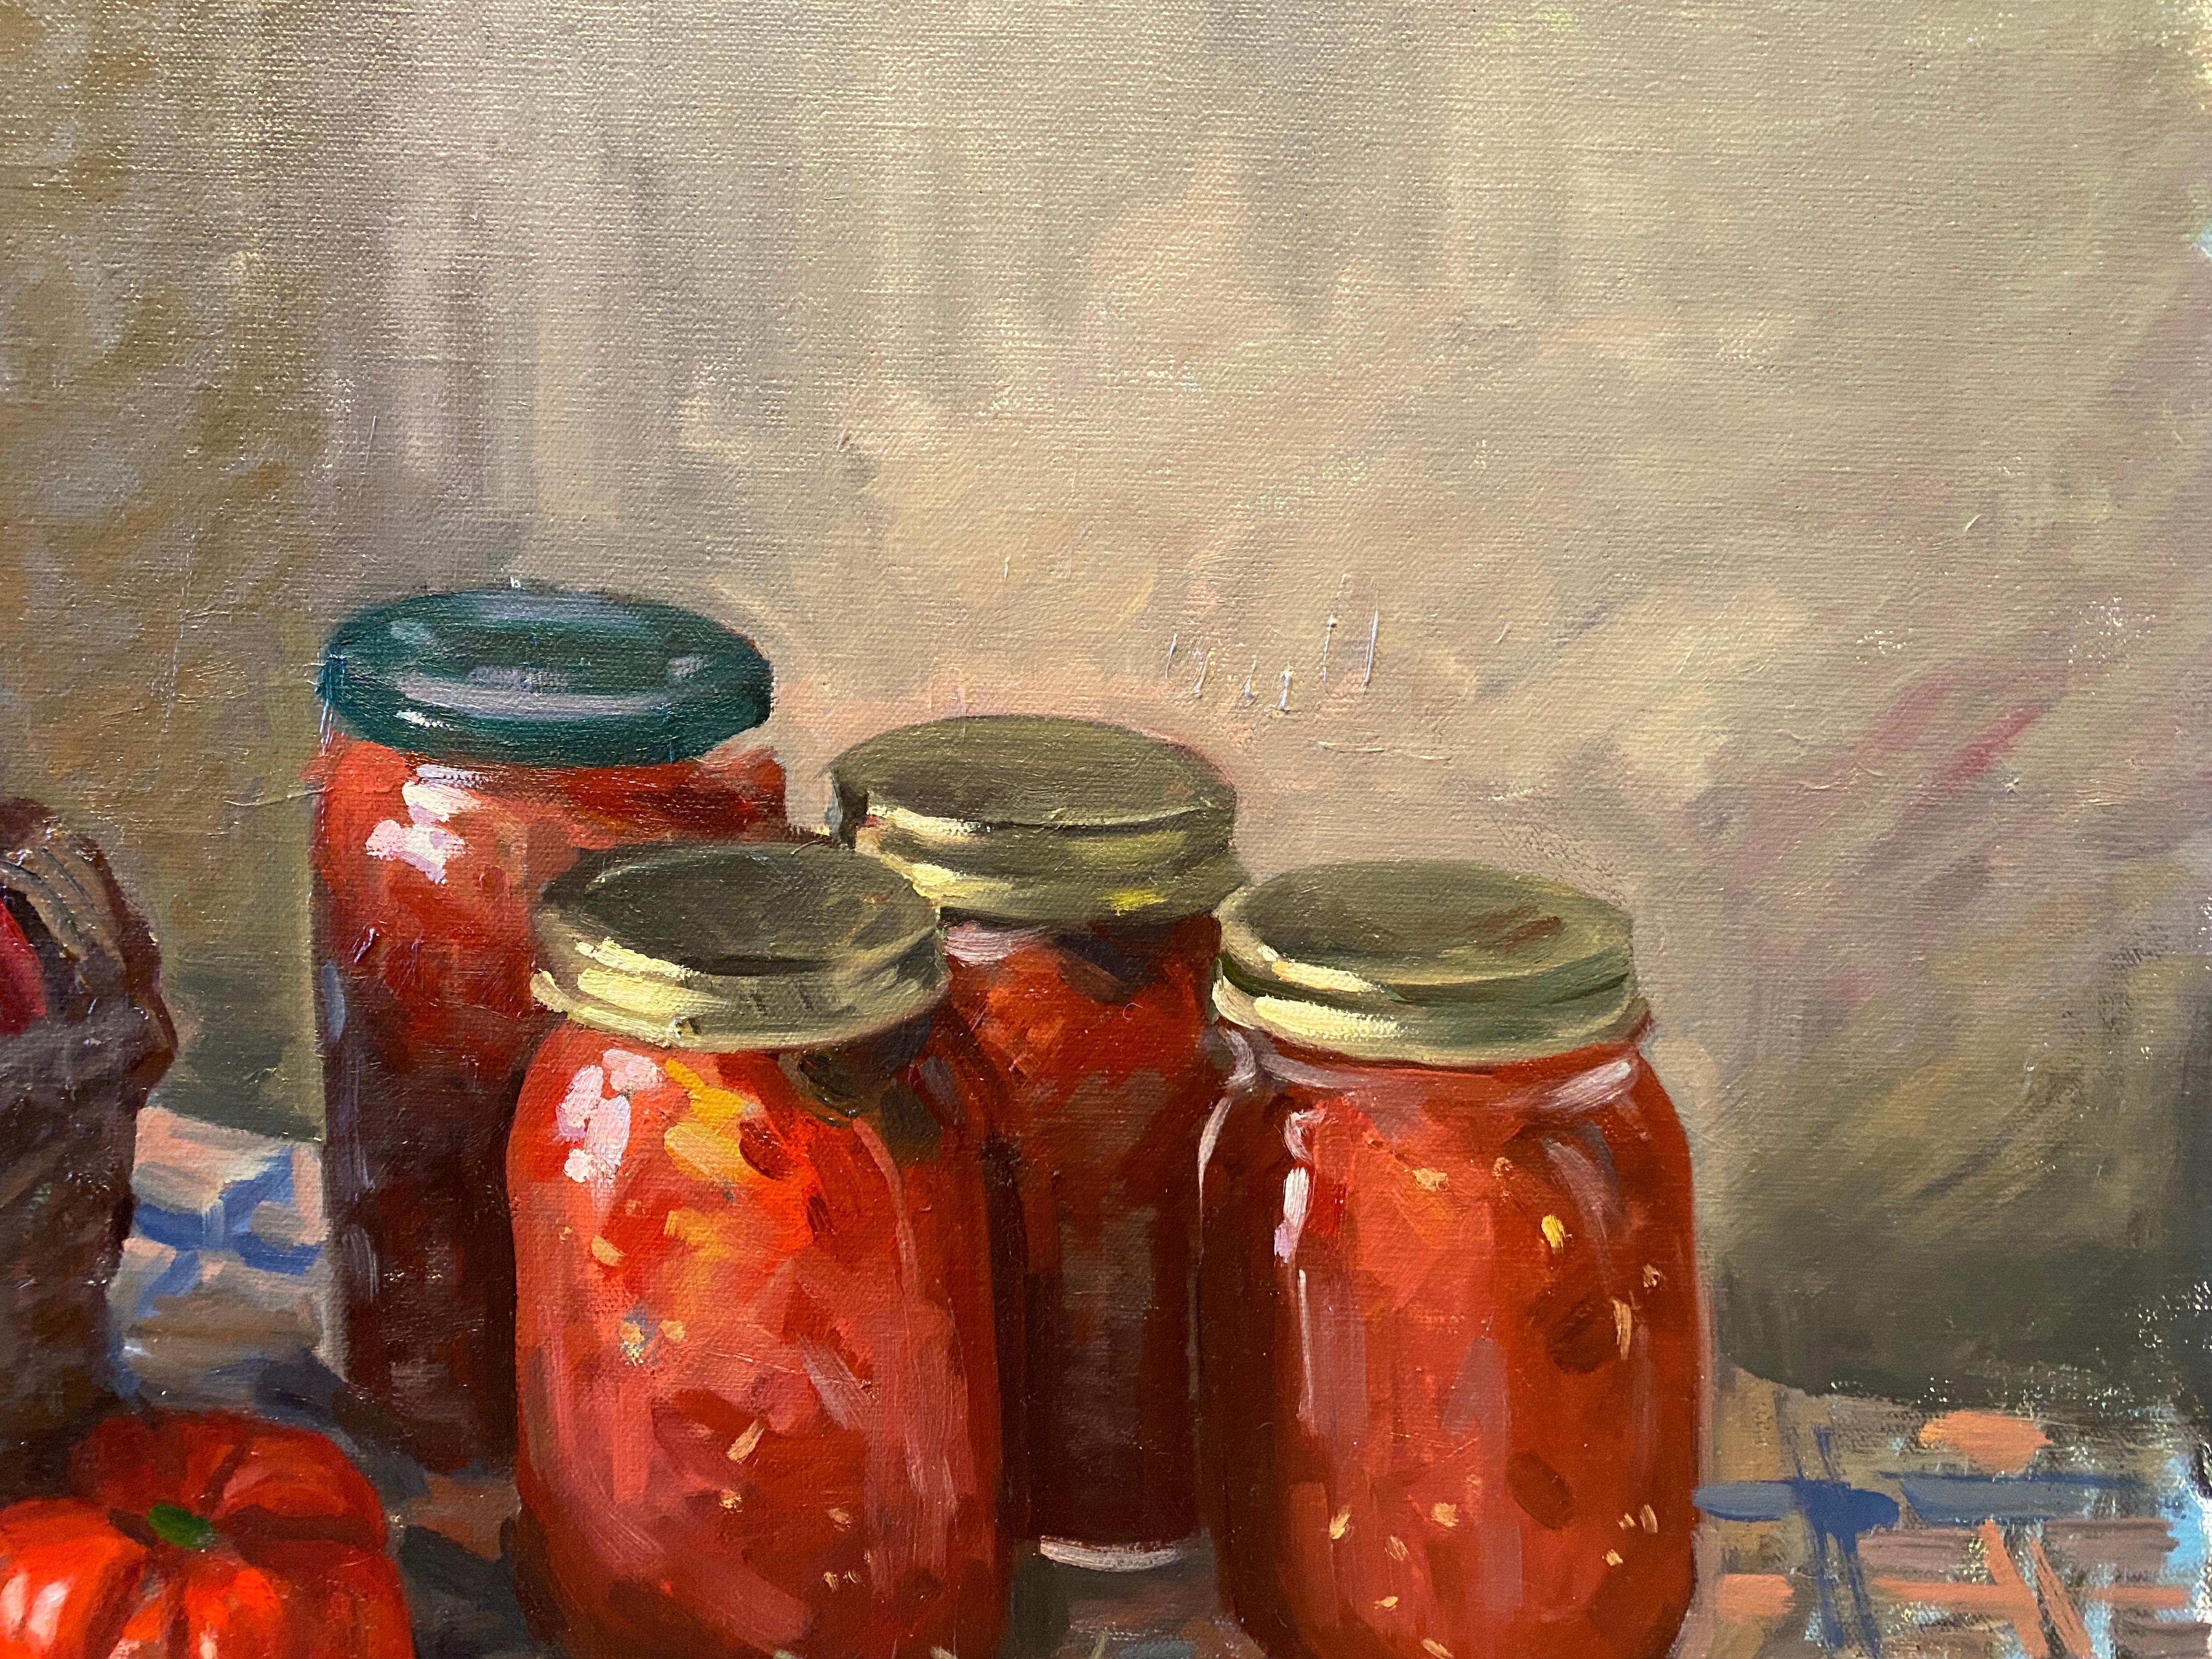 A still life oil painting of brilliant red tomatoes on a checker patterned tablecloth. This work is a reflection of the artist's belief that ordinary things possess great beauty.  After a morning of picking tomatoes from the garden in their Tuscan